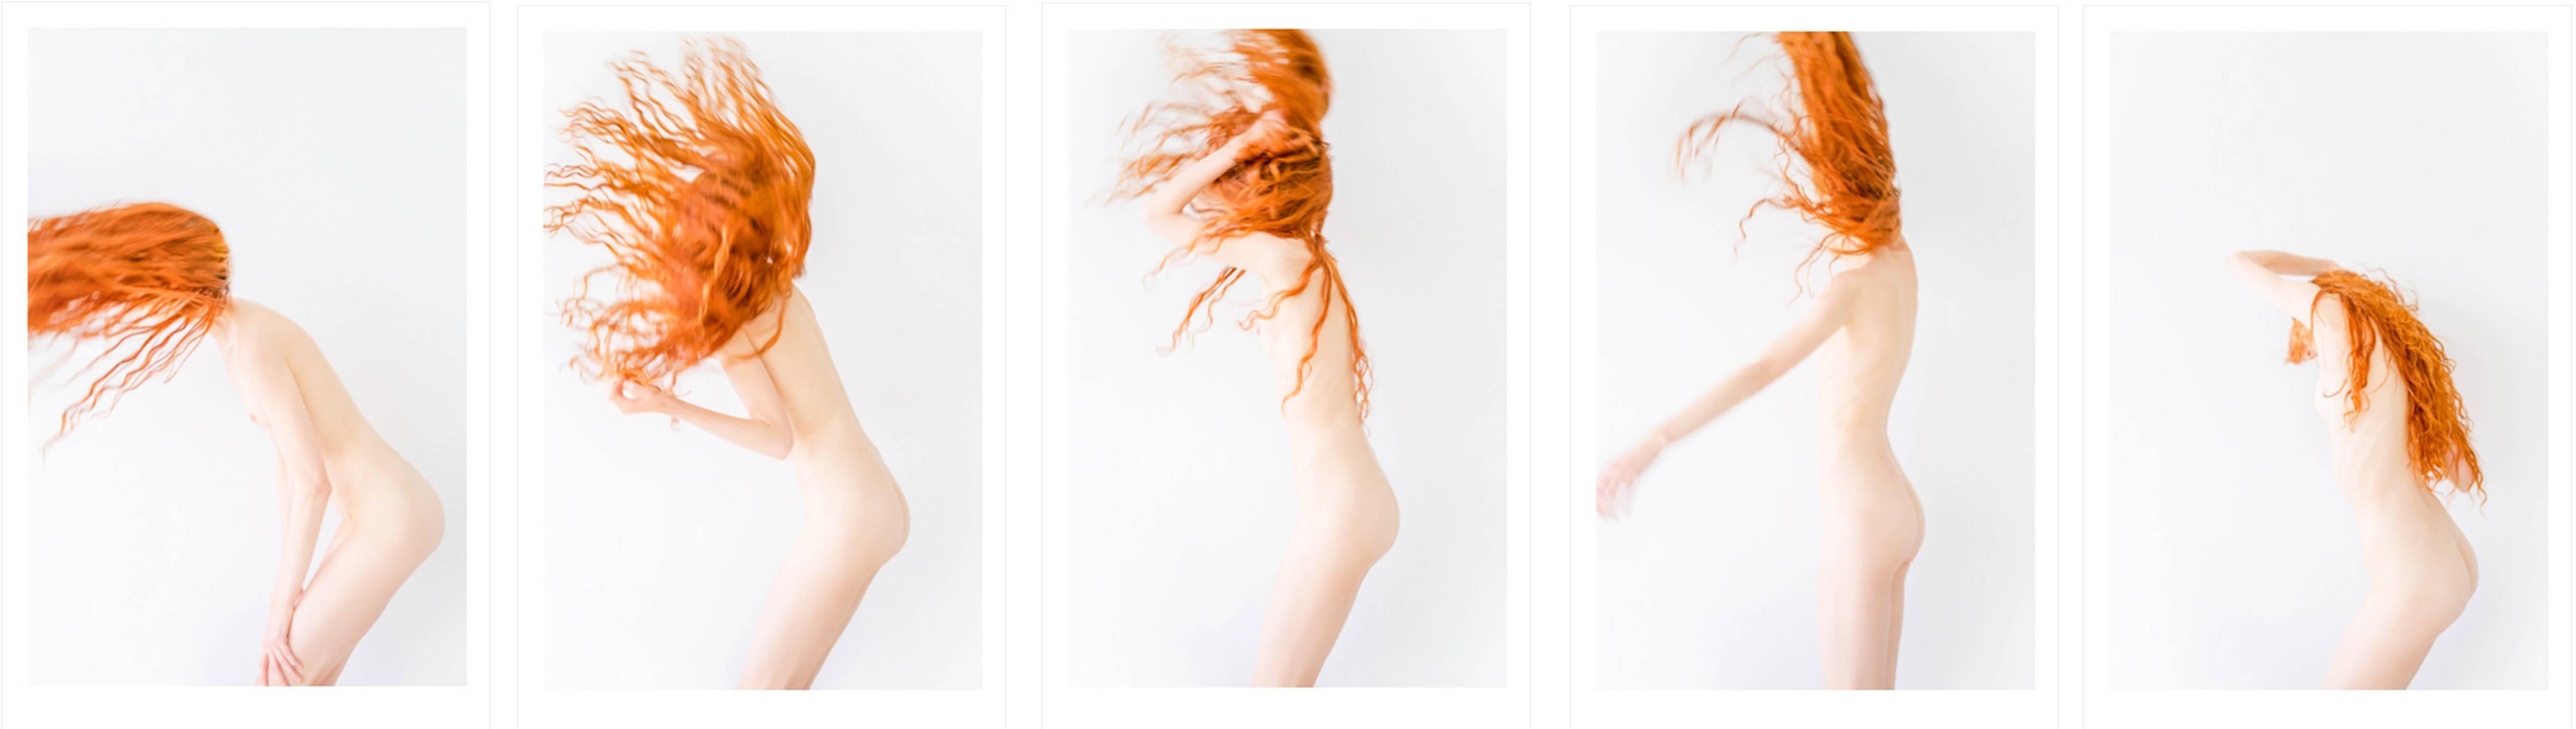 RED!. Polyptych  #1-7-6-4-12 . Nude photography in color.